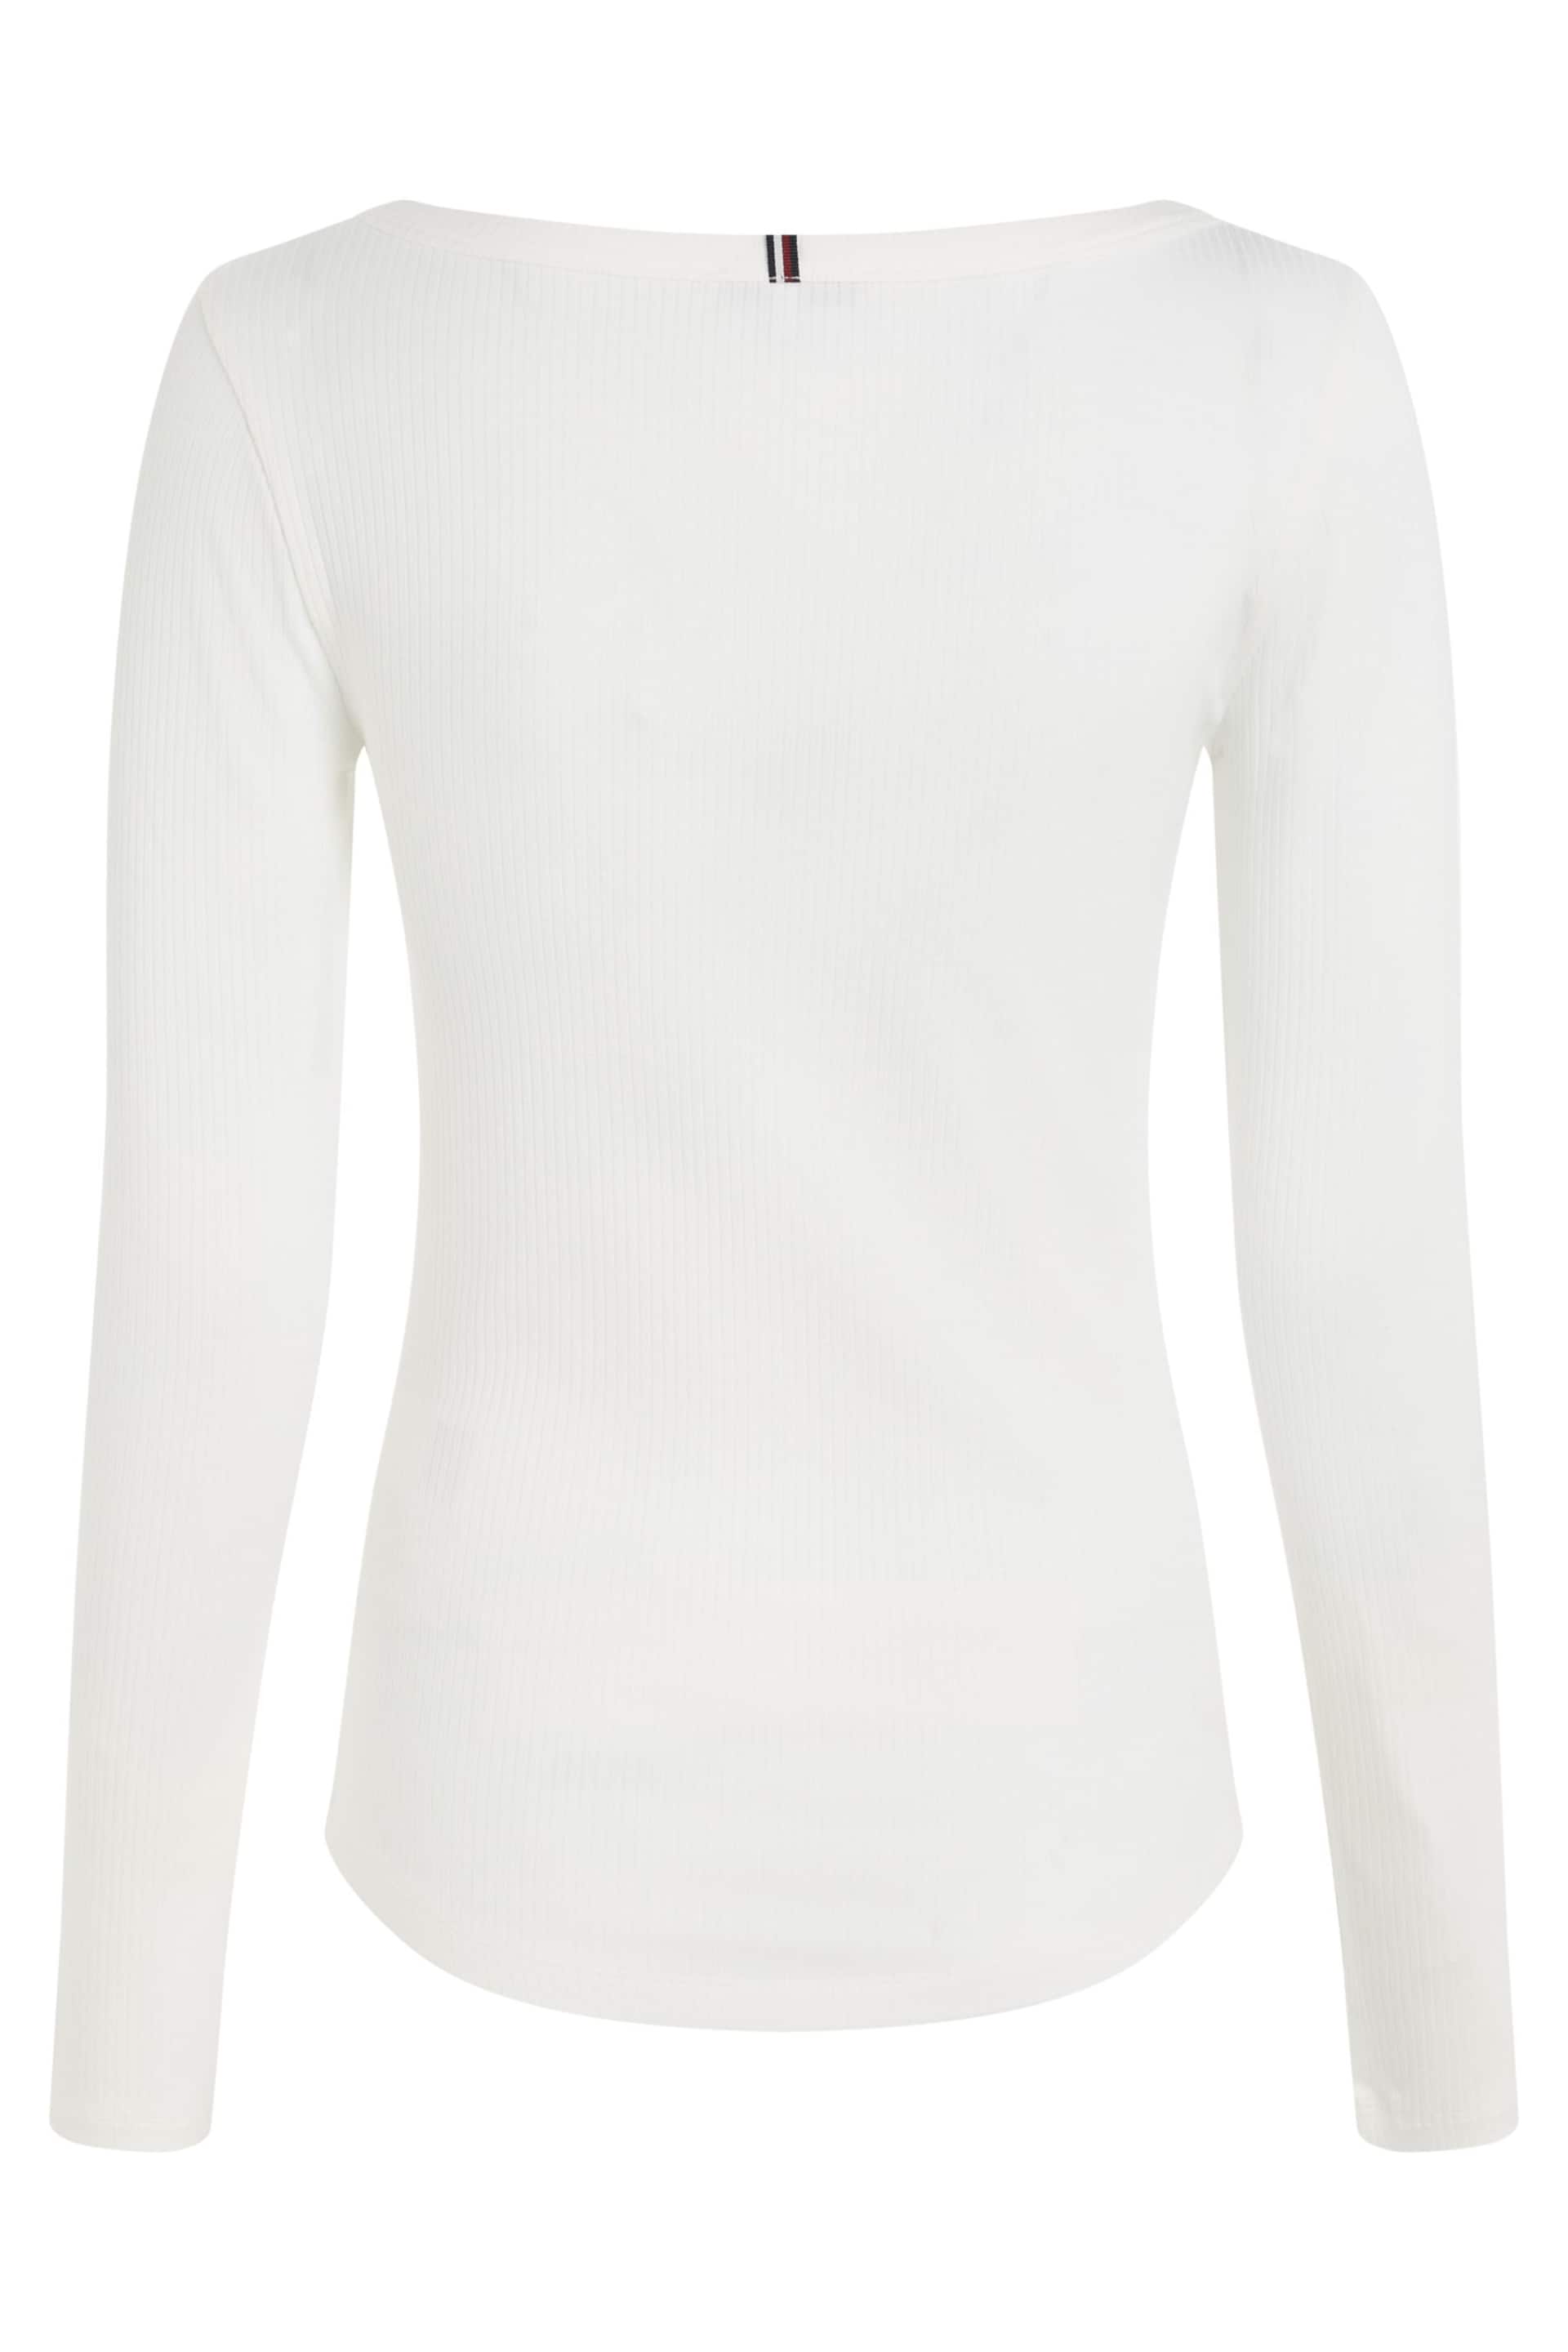 Tommy Hilfiger Cream Slim Fit Long Sleeve T-Shirt - Image 5 of 6